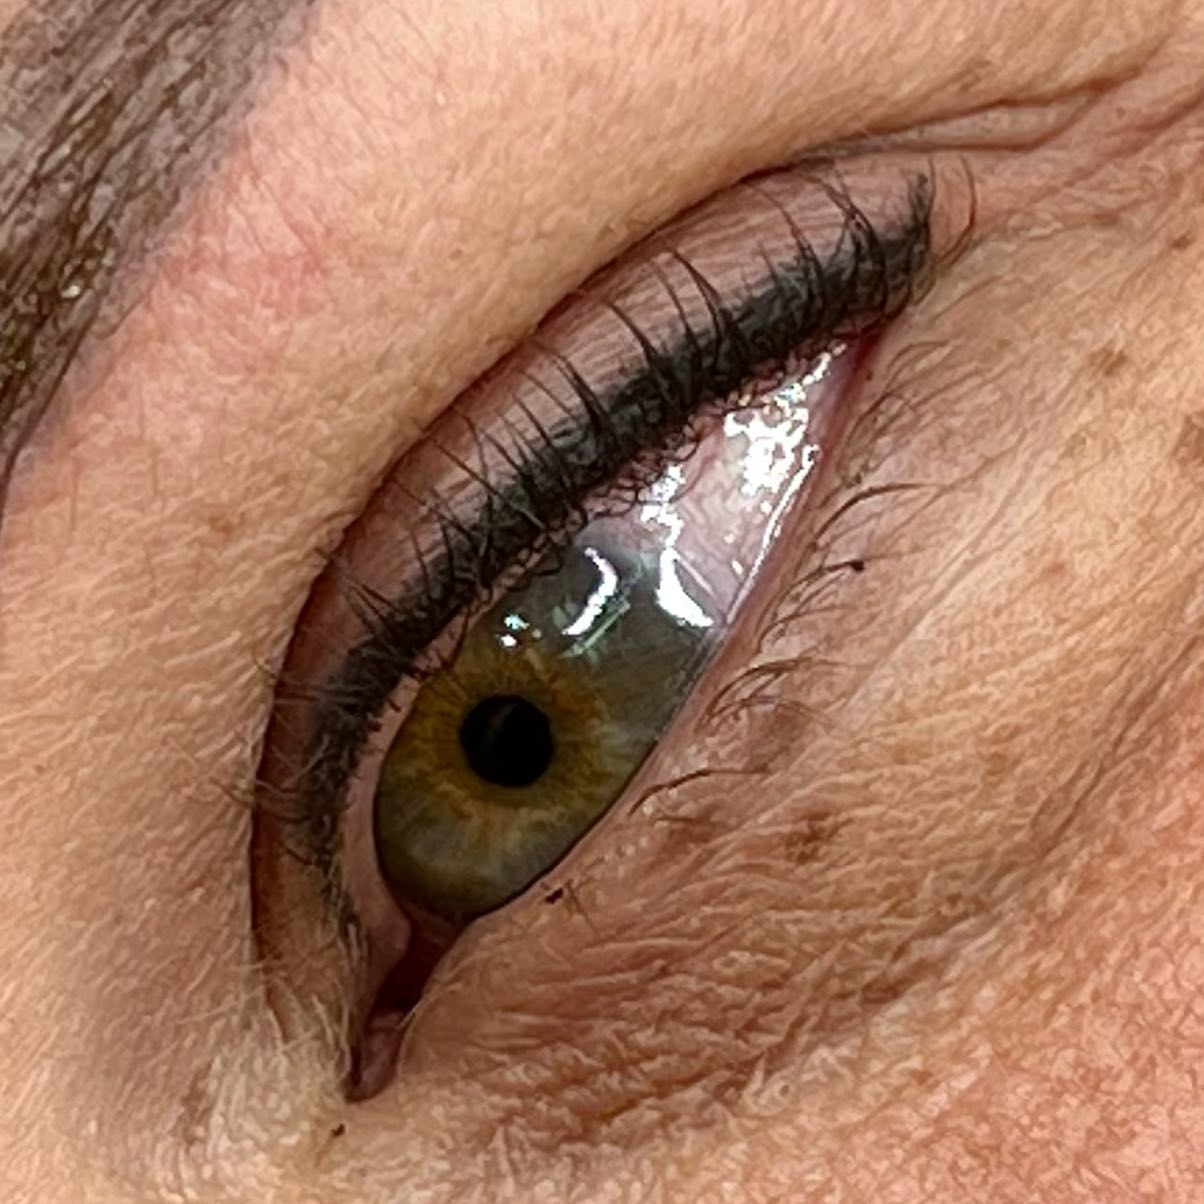 BYE BYE 
Smudging
Raccoon eyes
Running
It's waterproof 
Wake up with your makeup
➡️➡️ easier than you think to have done. 
We use numbing
Eyes are closed
I stretch and control them
Just lay back and relax while I take care of the rest. 
Winkandinked.com to book
.
.
.
#winkandinked #nhbrows #nhbrowsartist #nhwinkbabe #nhbrowspecialist #nhombrebrows #nheyelinerqueen #newhampshire #derrynh #londonderrynh #manchesternh #nashuanh #seacoastnh #nhtattoo #nhbrowtattoo #nheyelinertattoo #nhlipblush #nhliptattoo #nhmicroblading #microbladingnh #nhmade #nhpermanentmakeup #nhmakupartist #nhbrowsalon #nhbrowartist #nhwinkbrows #nhwinkeyeliner #nhsalon #madeinnh #nheyelineruboss